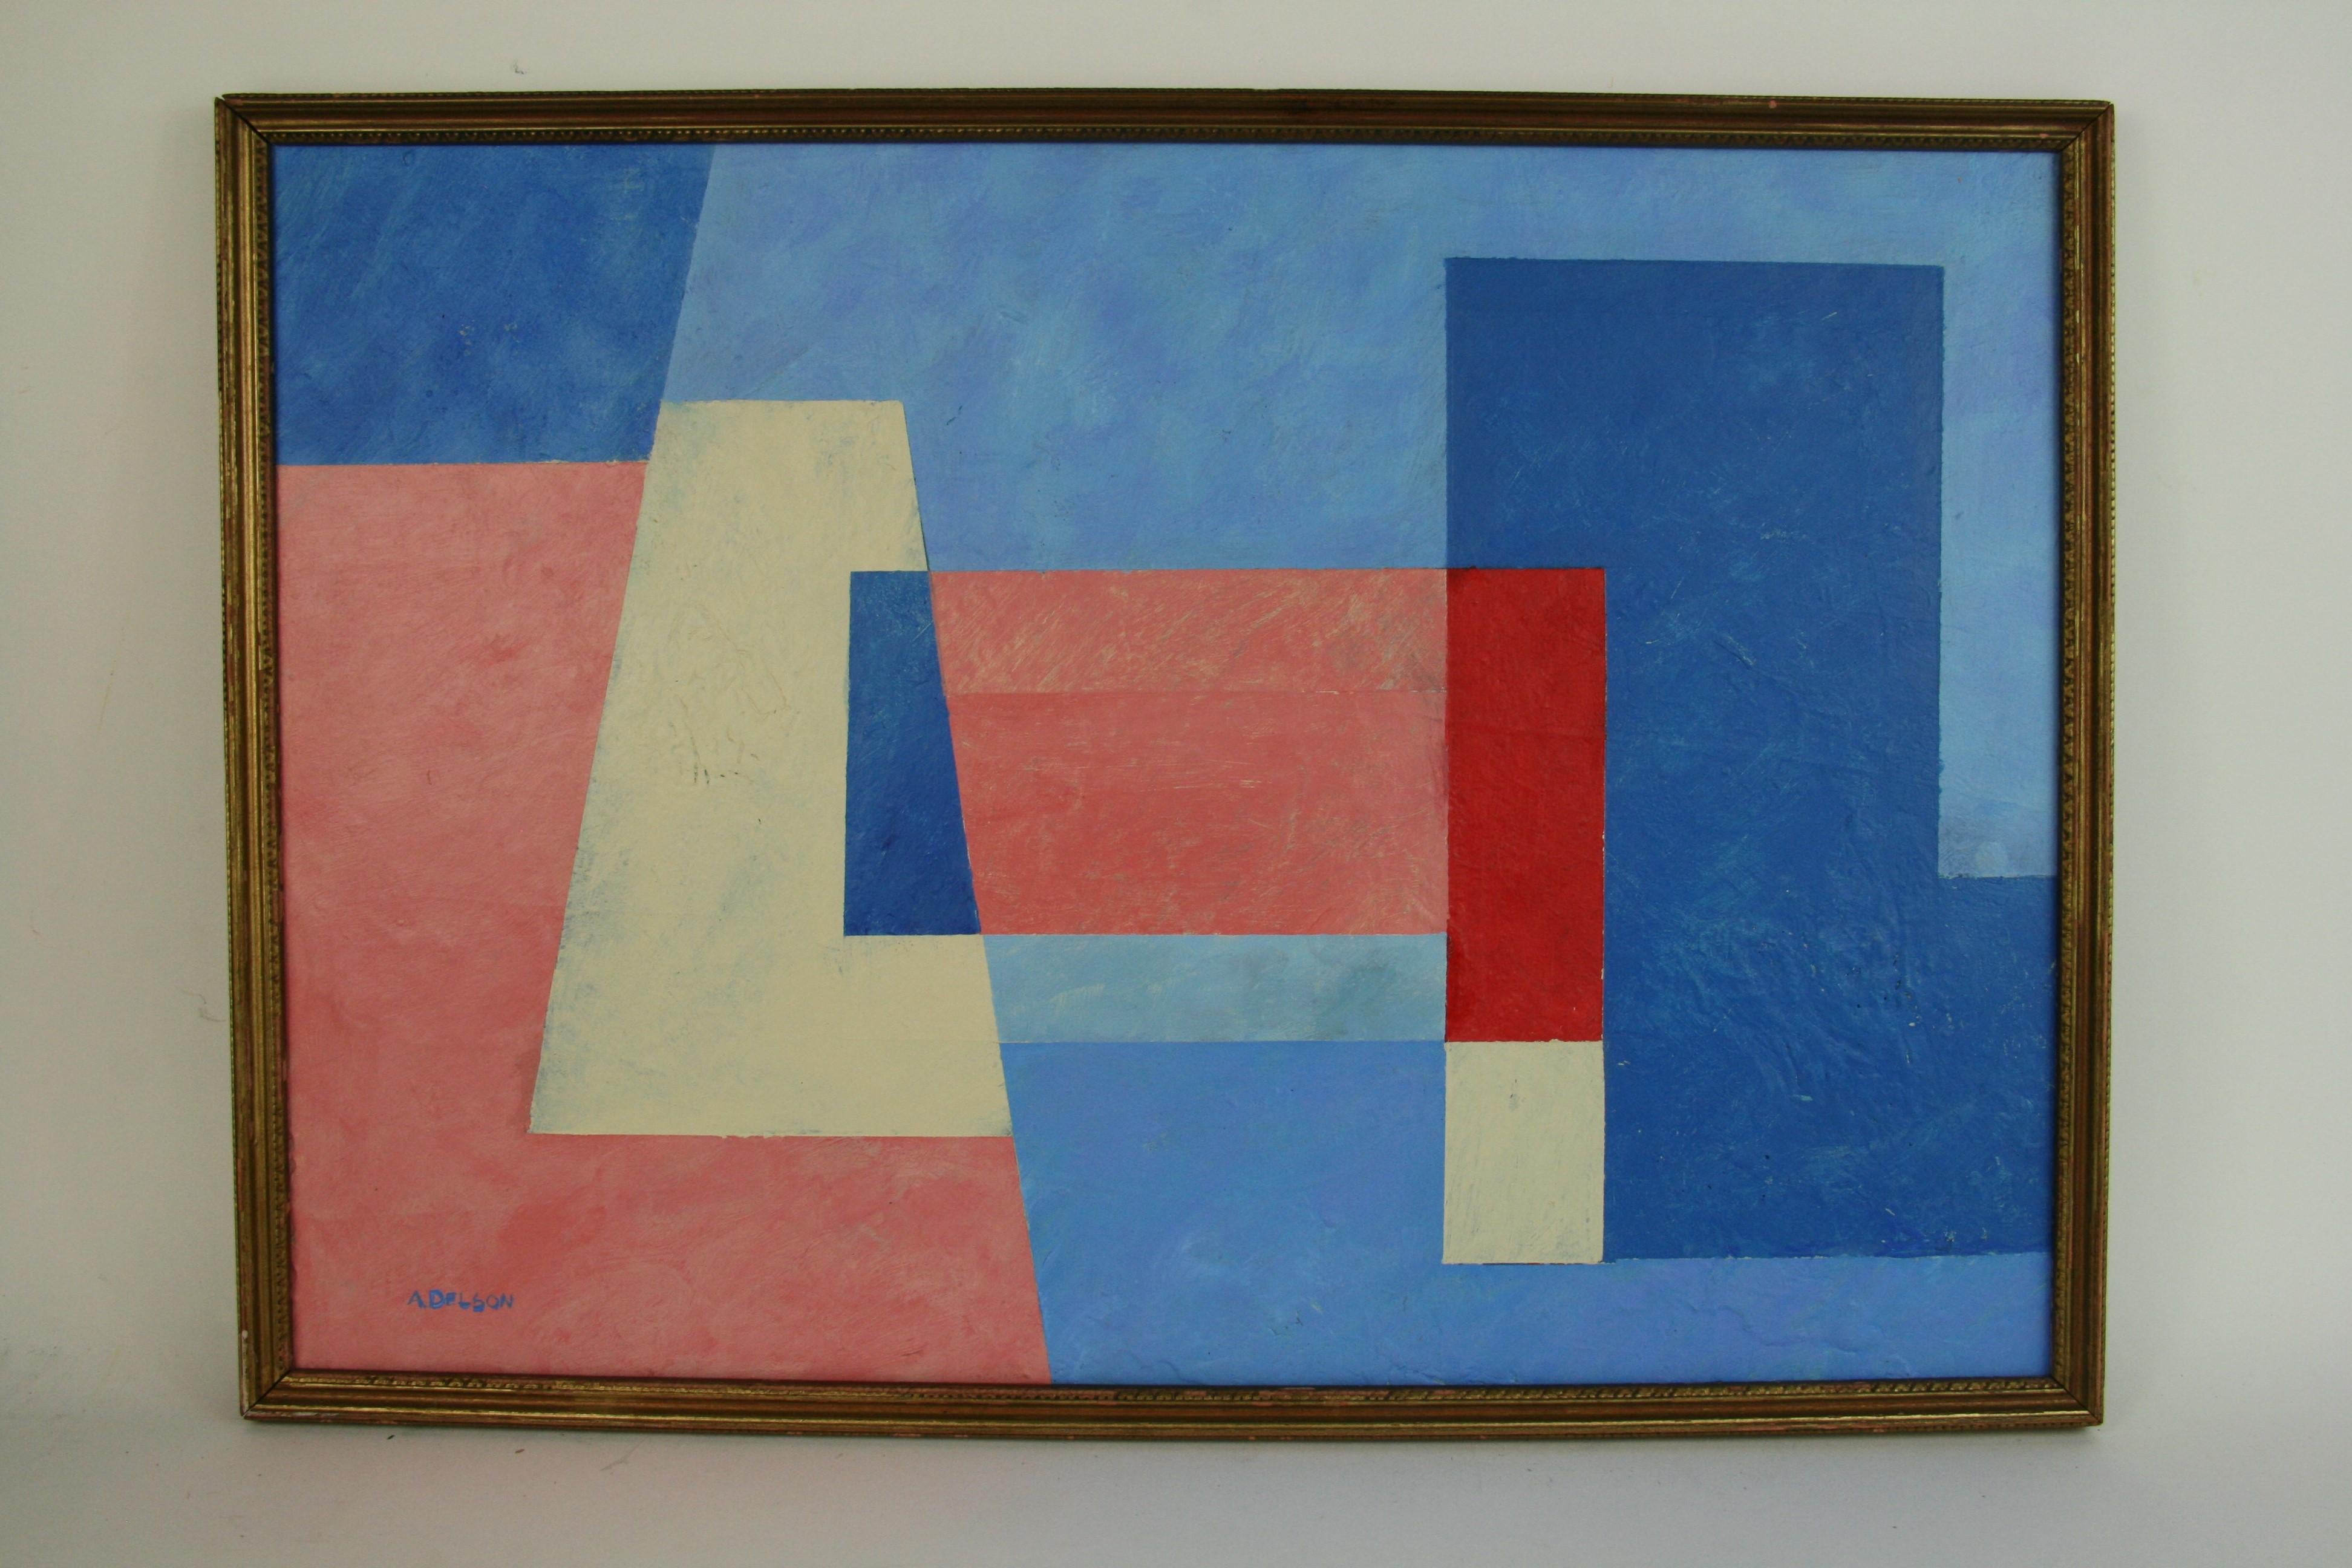 A.Delson Abstract Painting – Blaues und weißes abstraktes kubisches